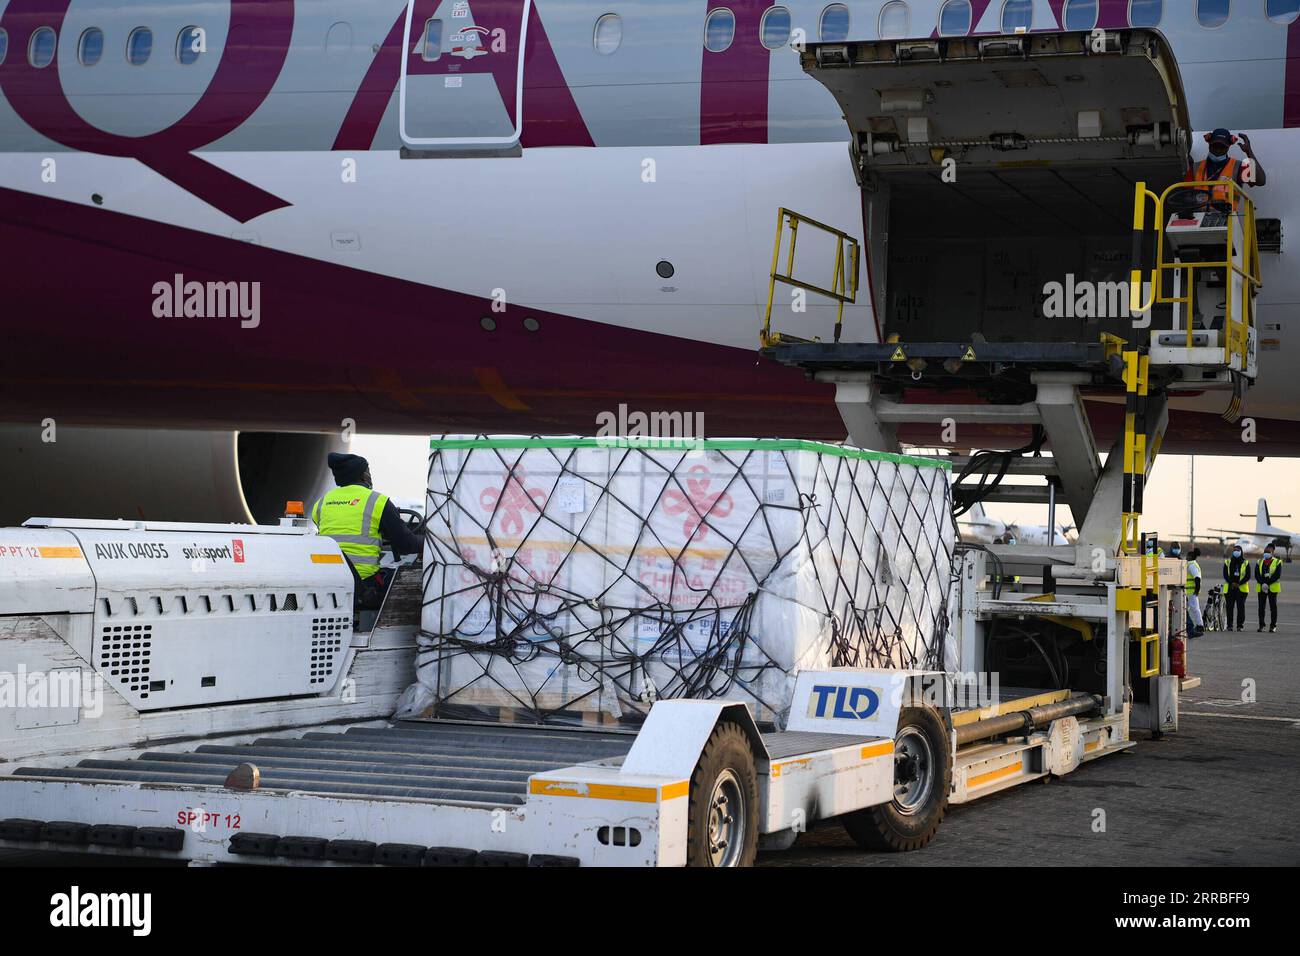 210919 -- NAIROBI, Sept. 19, 2021 -- Staff members unload China-donated COVID-19 vaccines at an airport in Nairobi, Kenya, Sept. 18, 2021. Senior Kenyan government officials on Saturday received a batch of Sinopharm COVID-19 vaccine doses from China as the East African nation ramps up inoculations for high-risk populations against the virus, saying they would reinvigorate the pandemic fight in the country.  KENYA-NAIROBI-CHINA-DONATED VACCINES-ARRIVAL LixYan PUBLICATIONxNOTxINxCHN Stock Photo